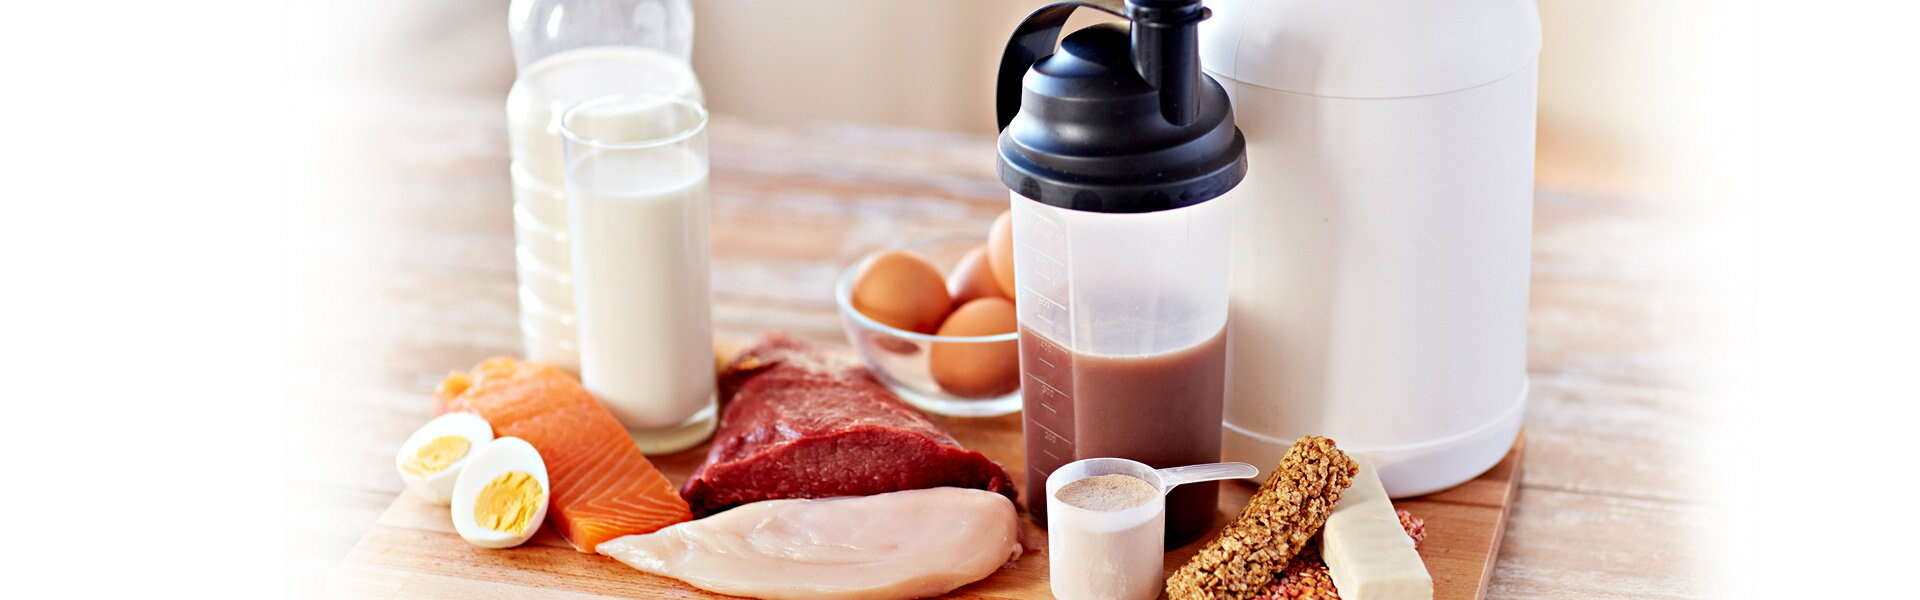 How much protein do I need? Daily Protein Intake Calculator